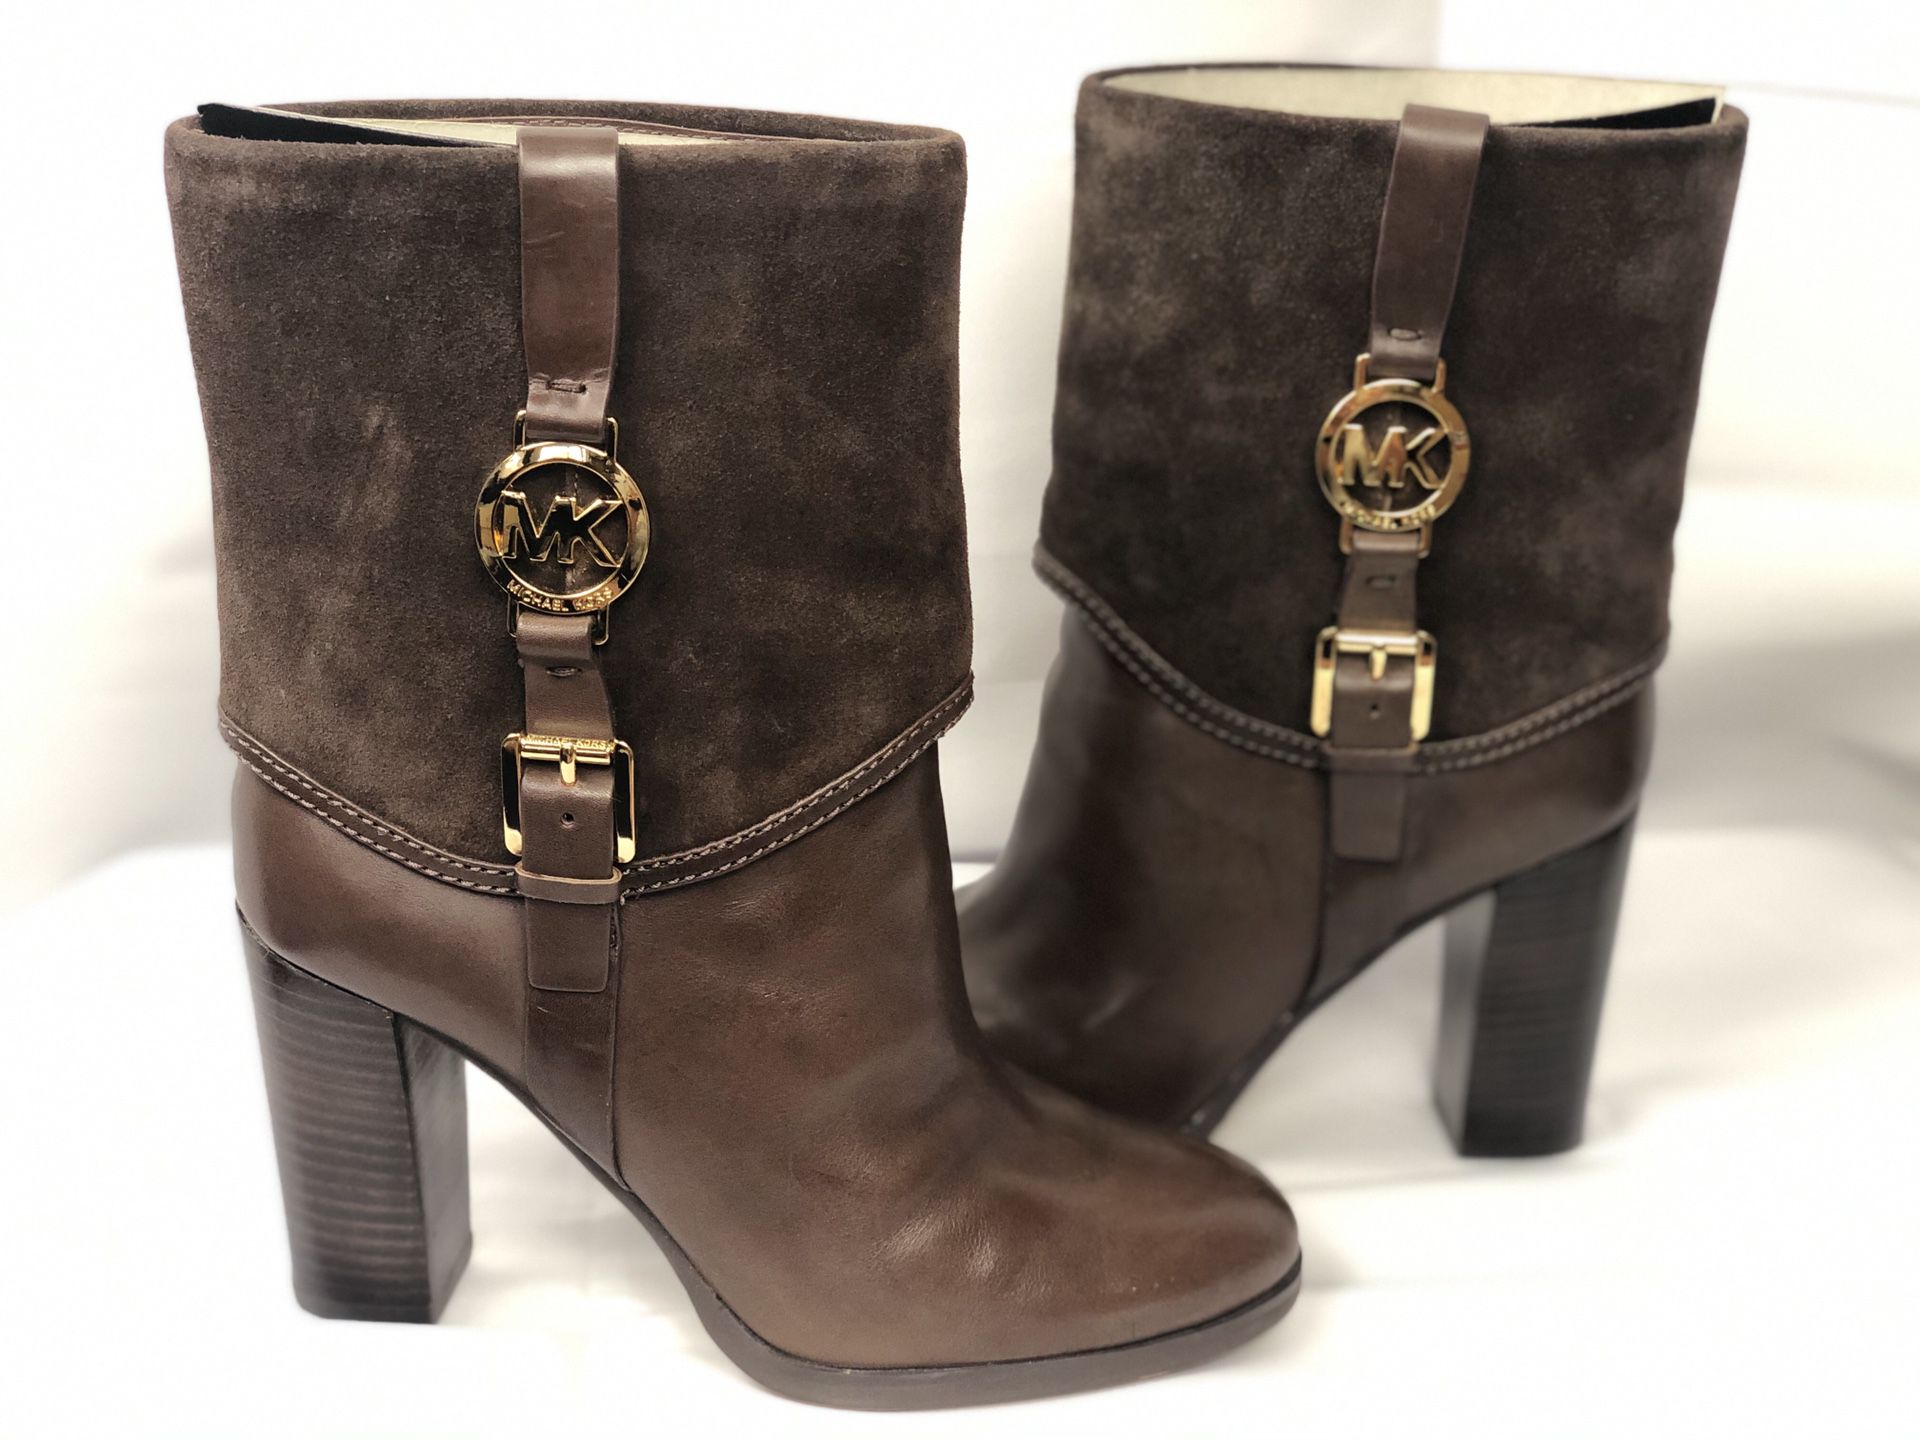 Michael Kors Fulton Bootie (mid-calf boots) size 8M leather/suede coffee color 3.75 “ heel